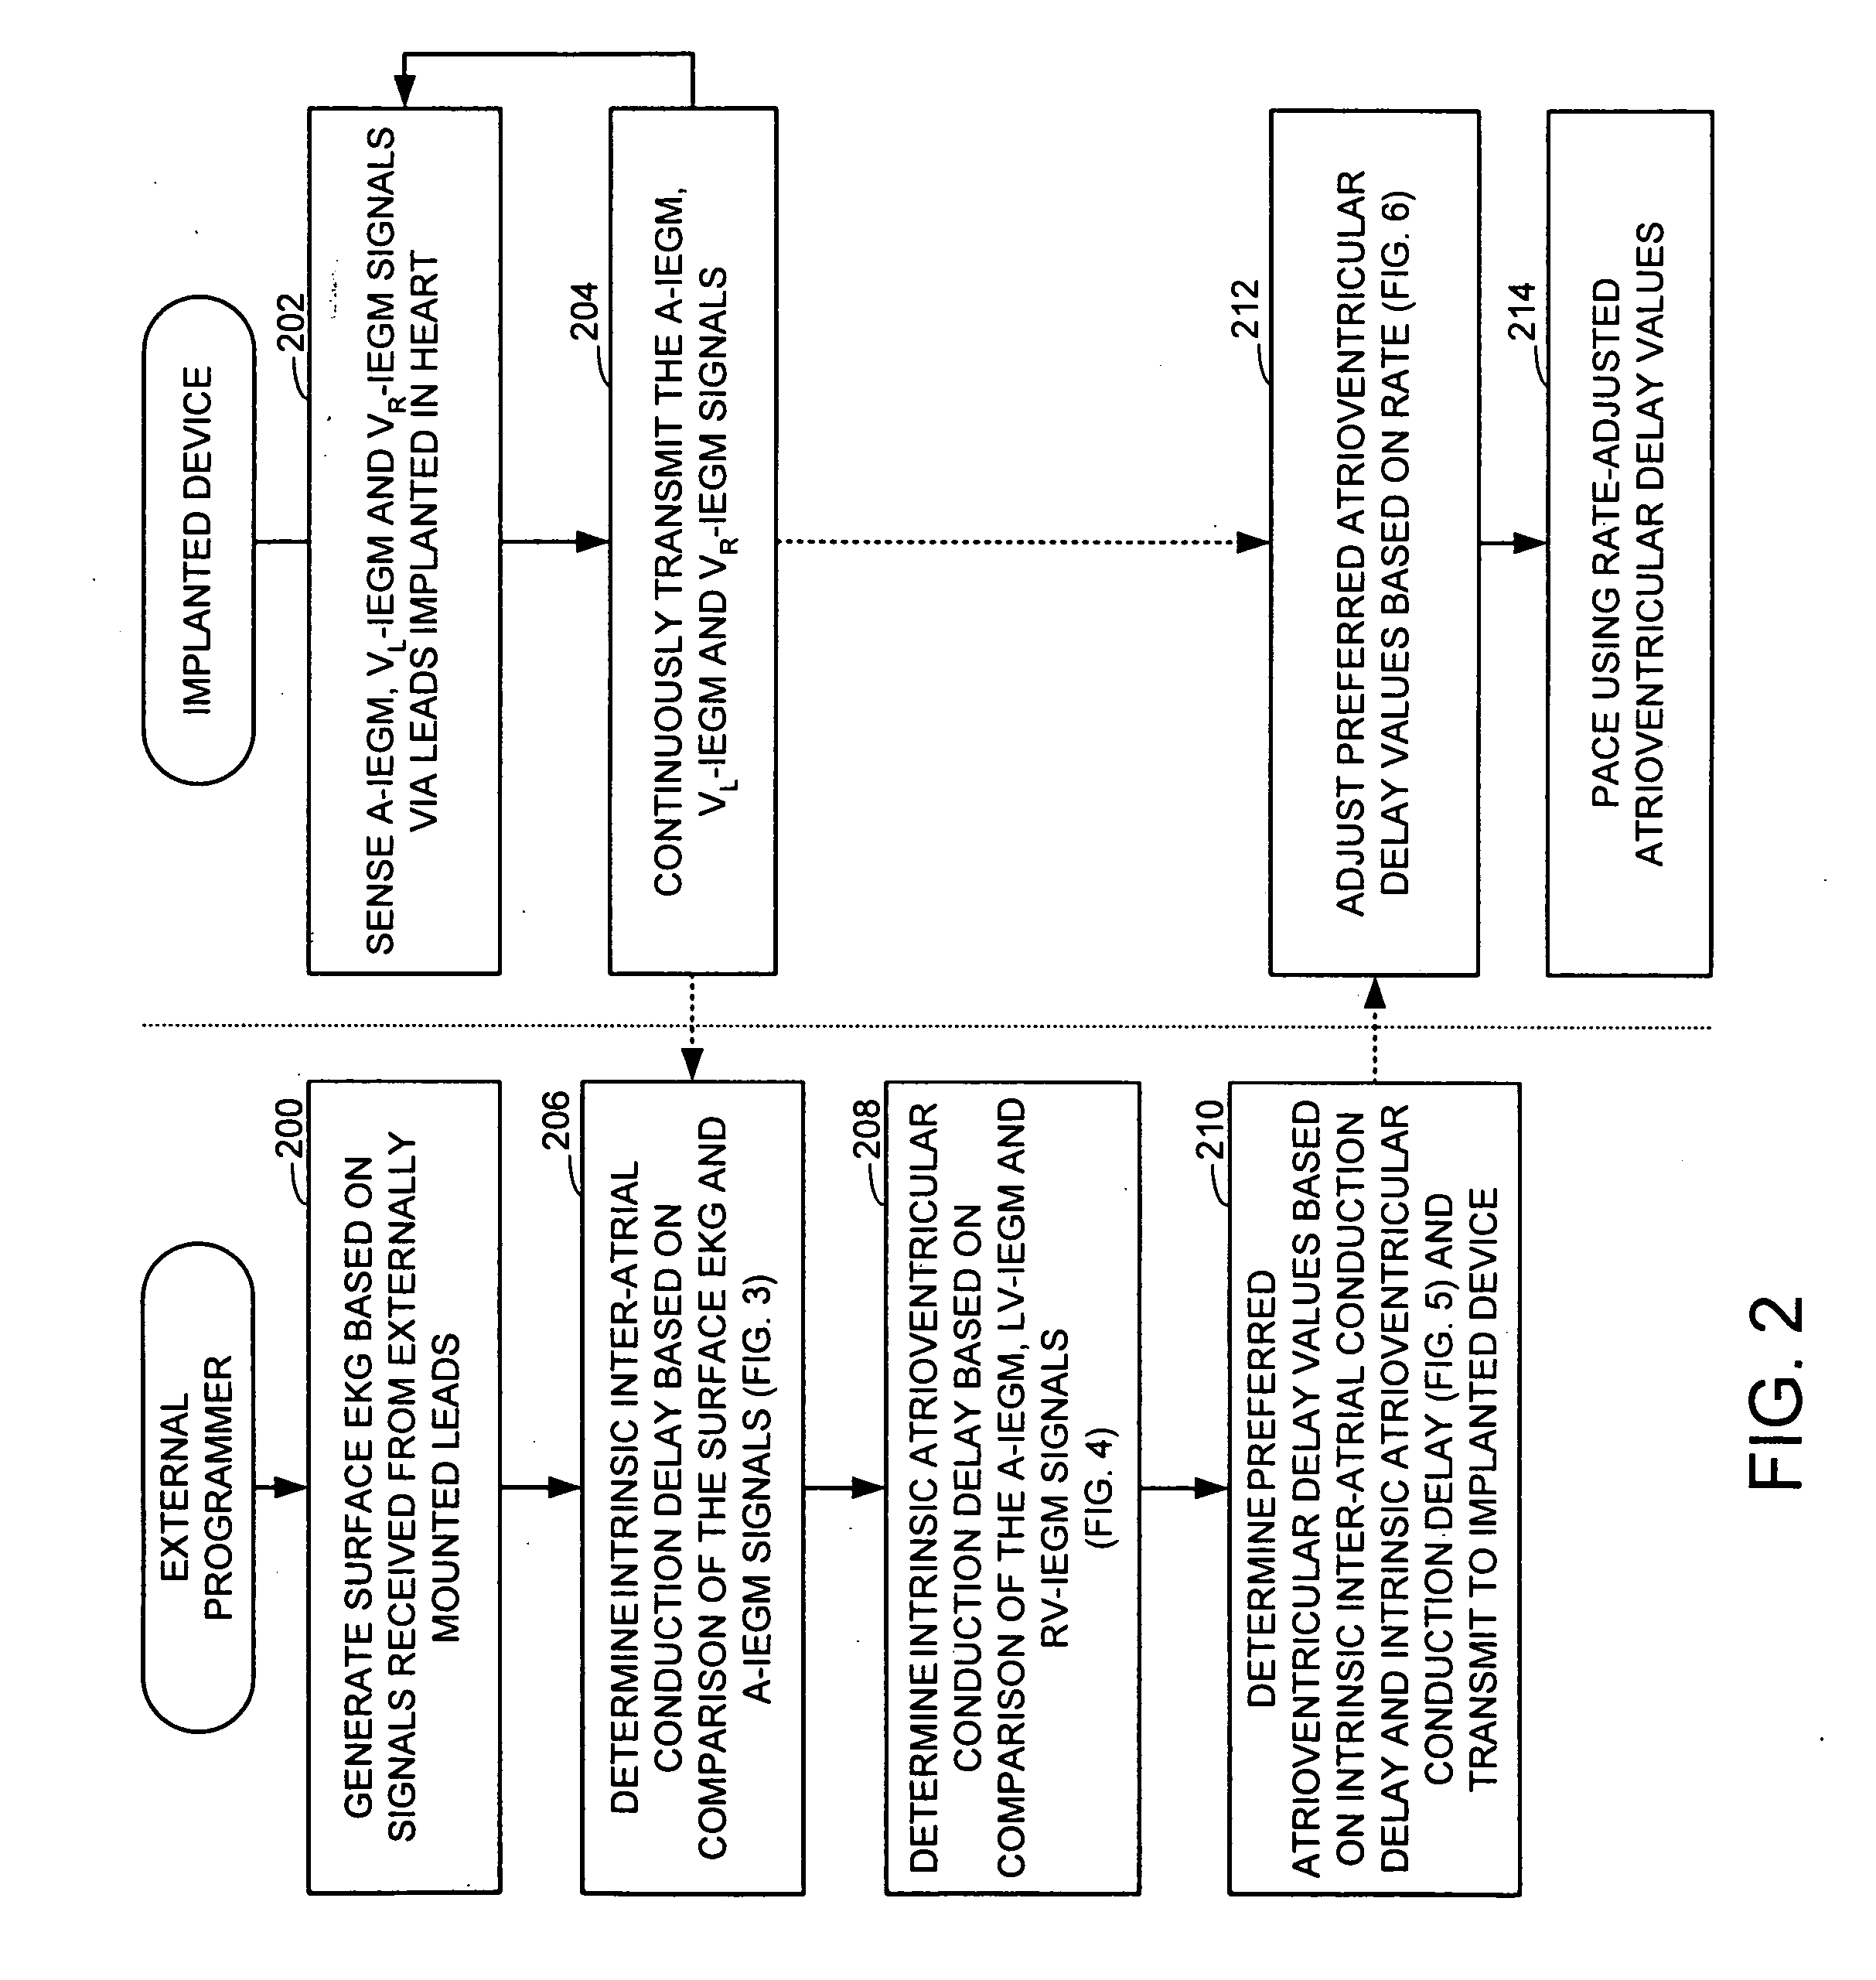 System and method for determining optimal atrioventricular delay based on intrinsic conduction delays